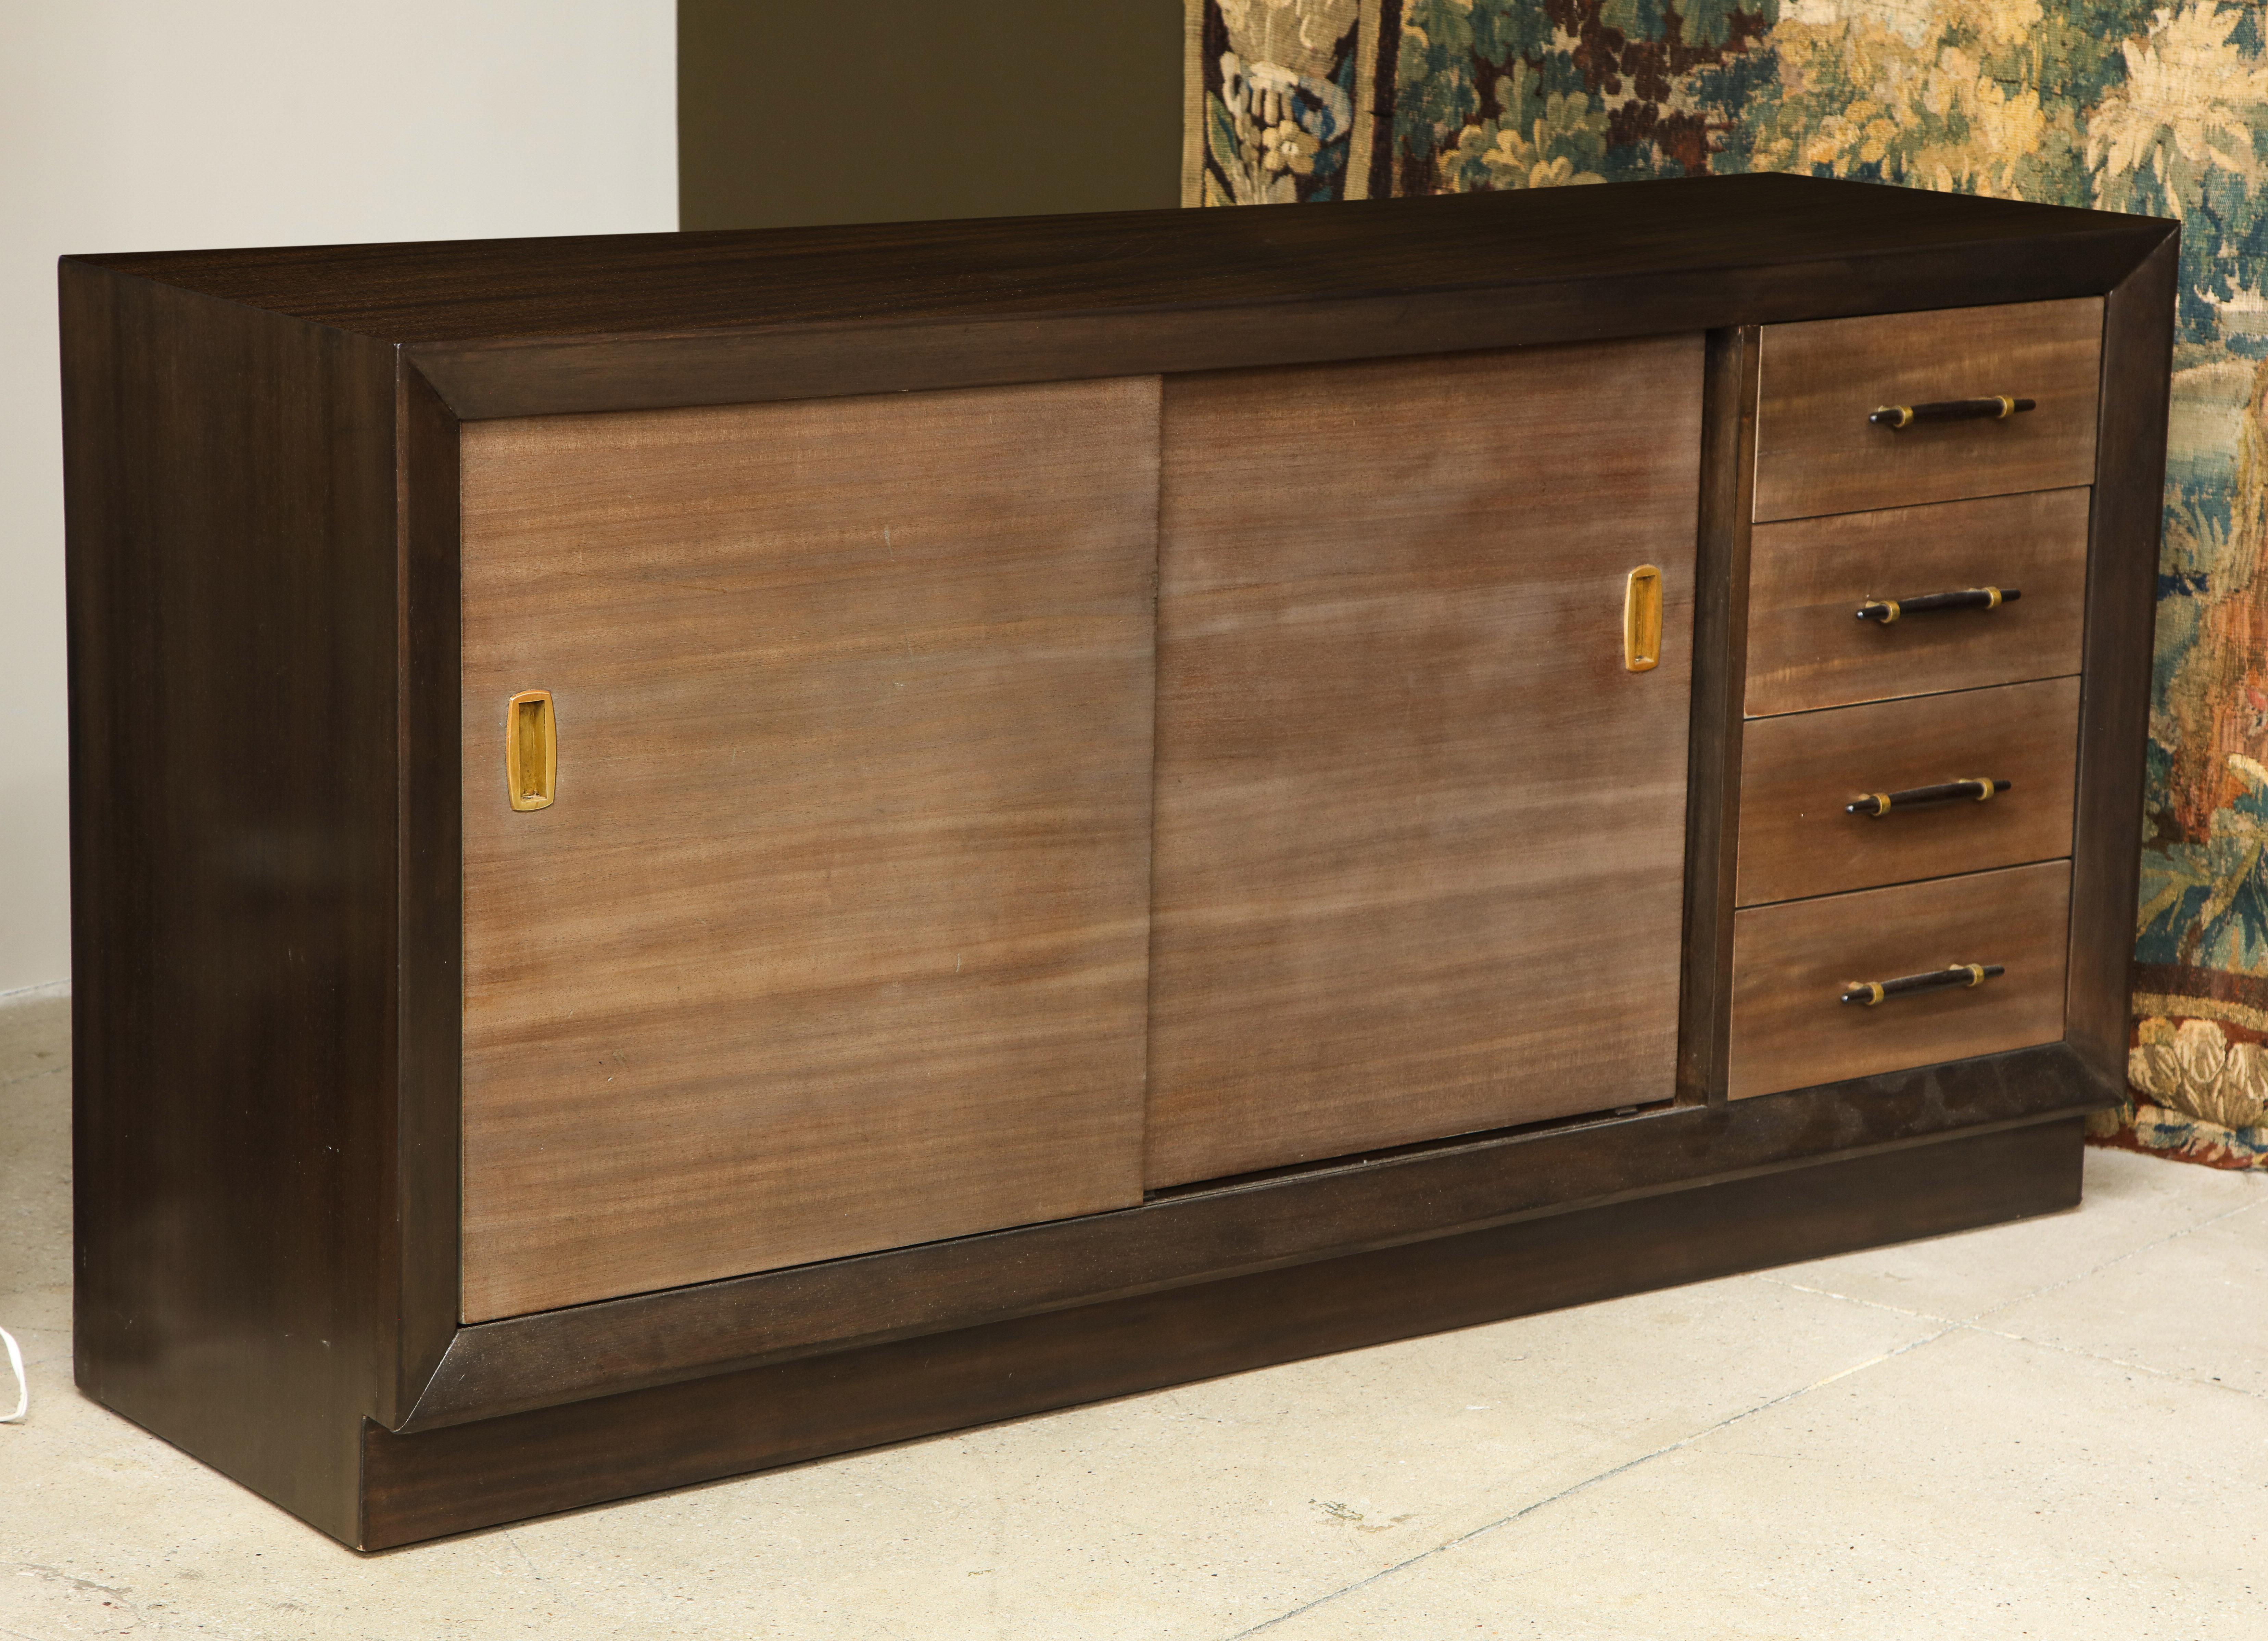 Dark walnut finished long dresser with sliding doors in a paler faun finish circa 1950. Interior cabinet drawer fronts also in the faun finish. 